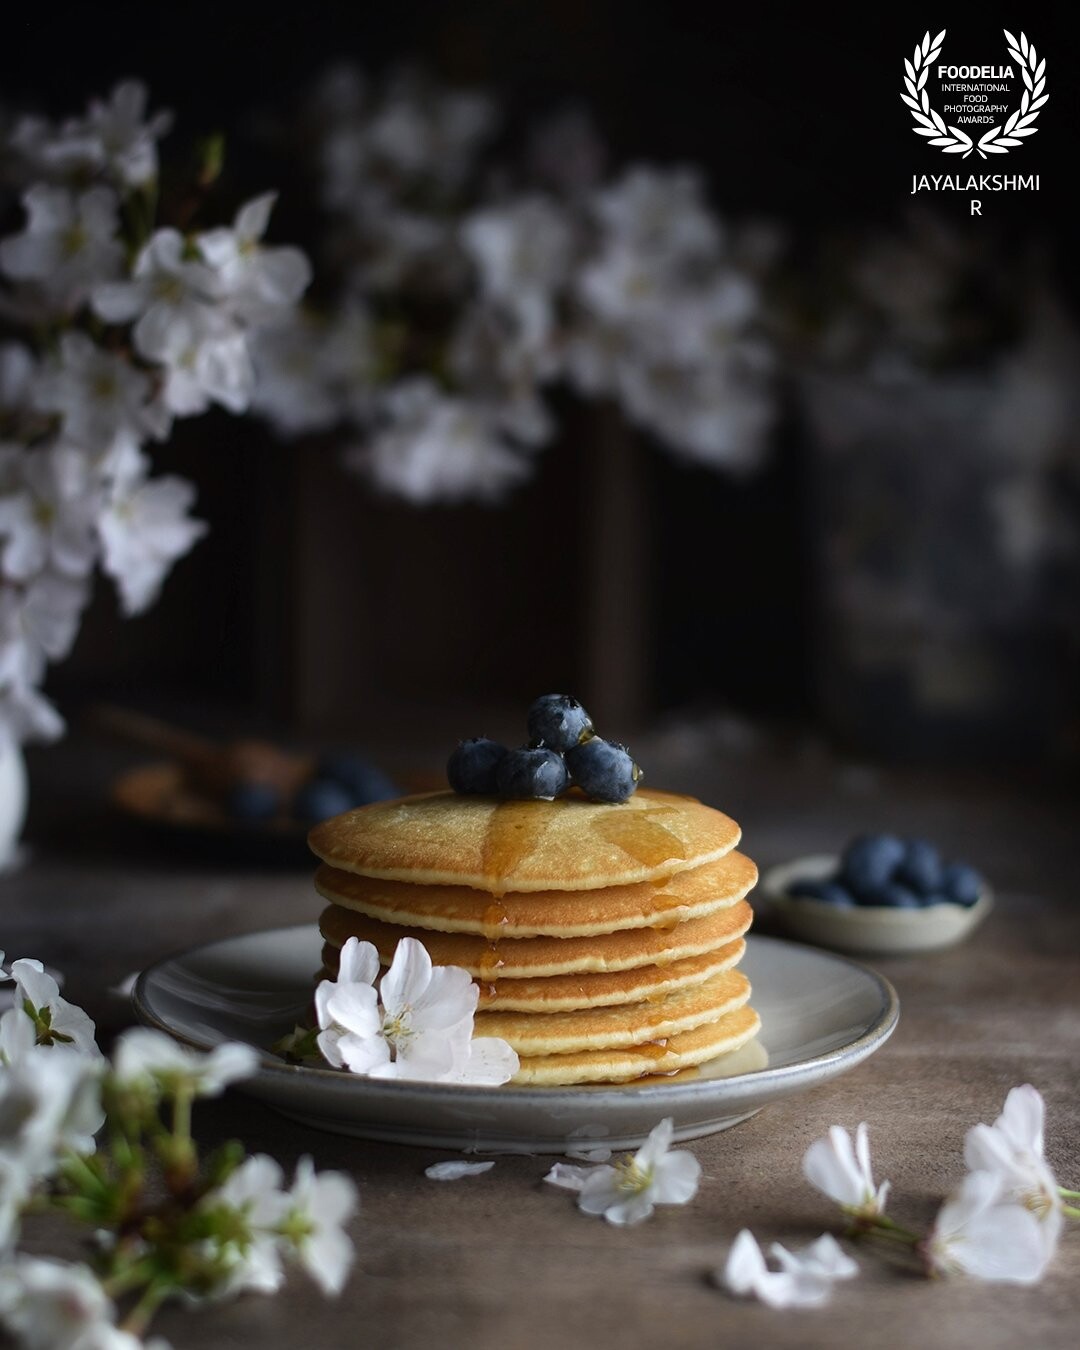 A regular breakfast scene . A stack of pancakes set amidst a floral setup . The idea was to capture the essence of spring by setting the scene with cherry blossom . Shot in natural light.